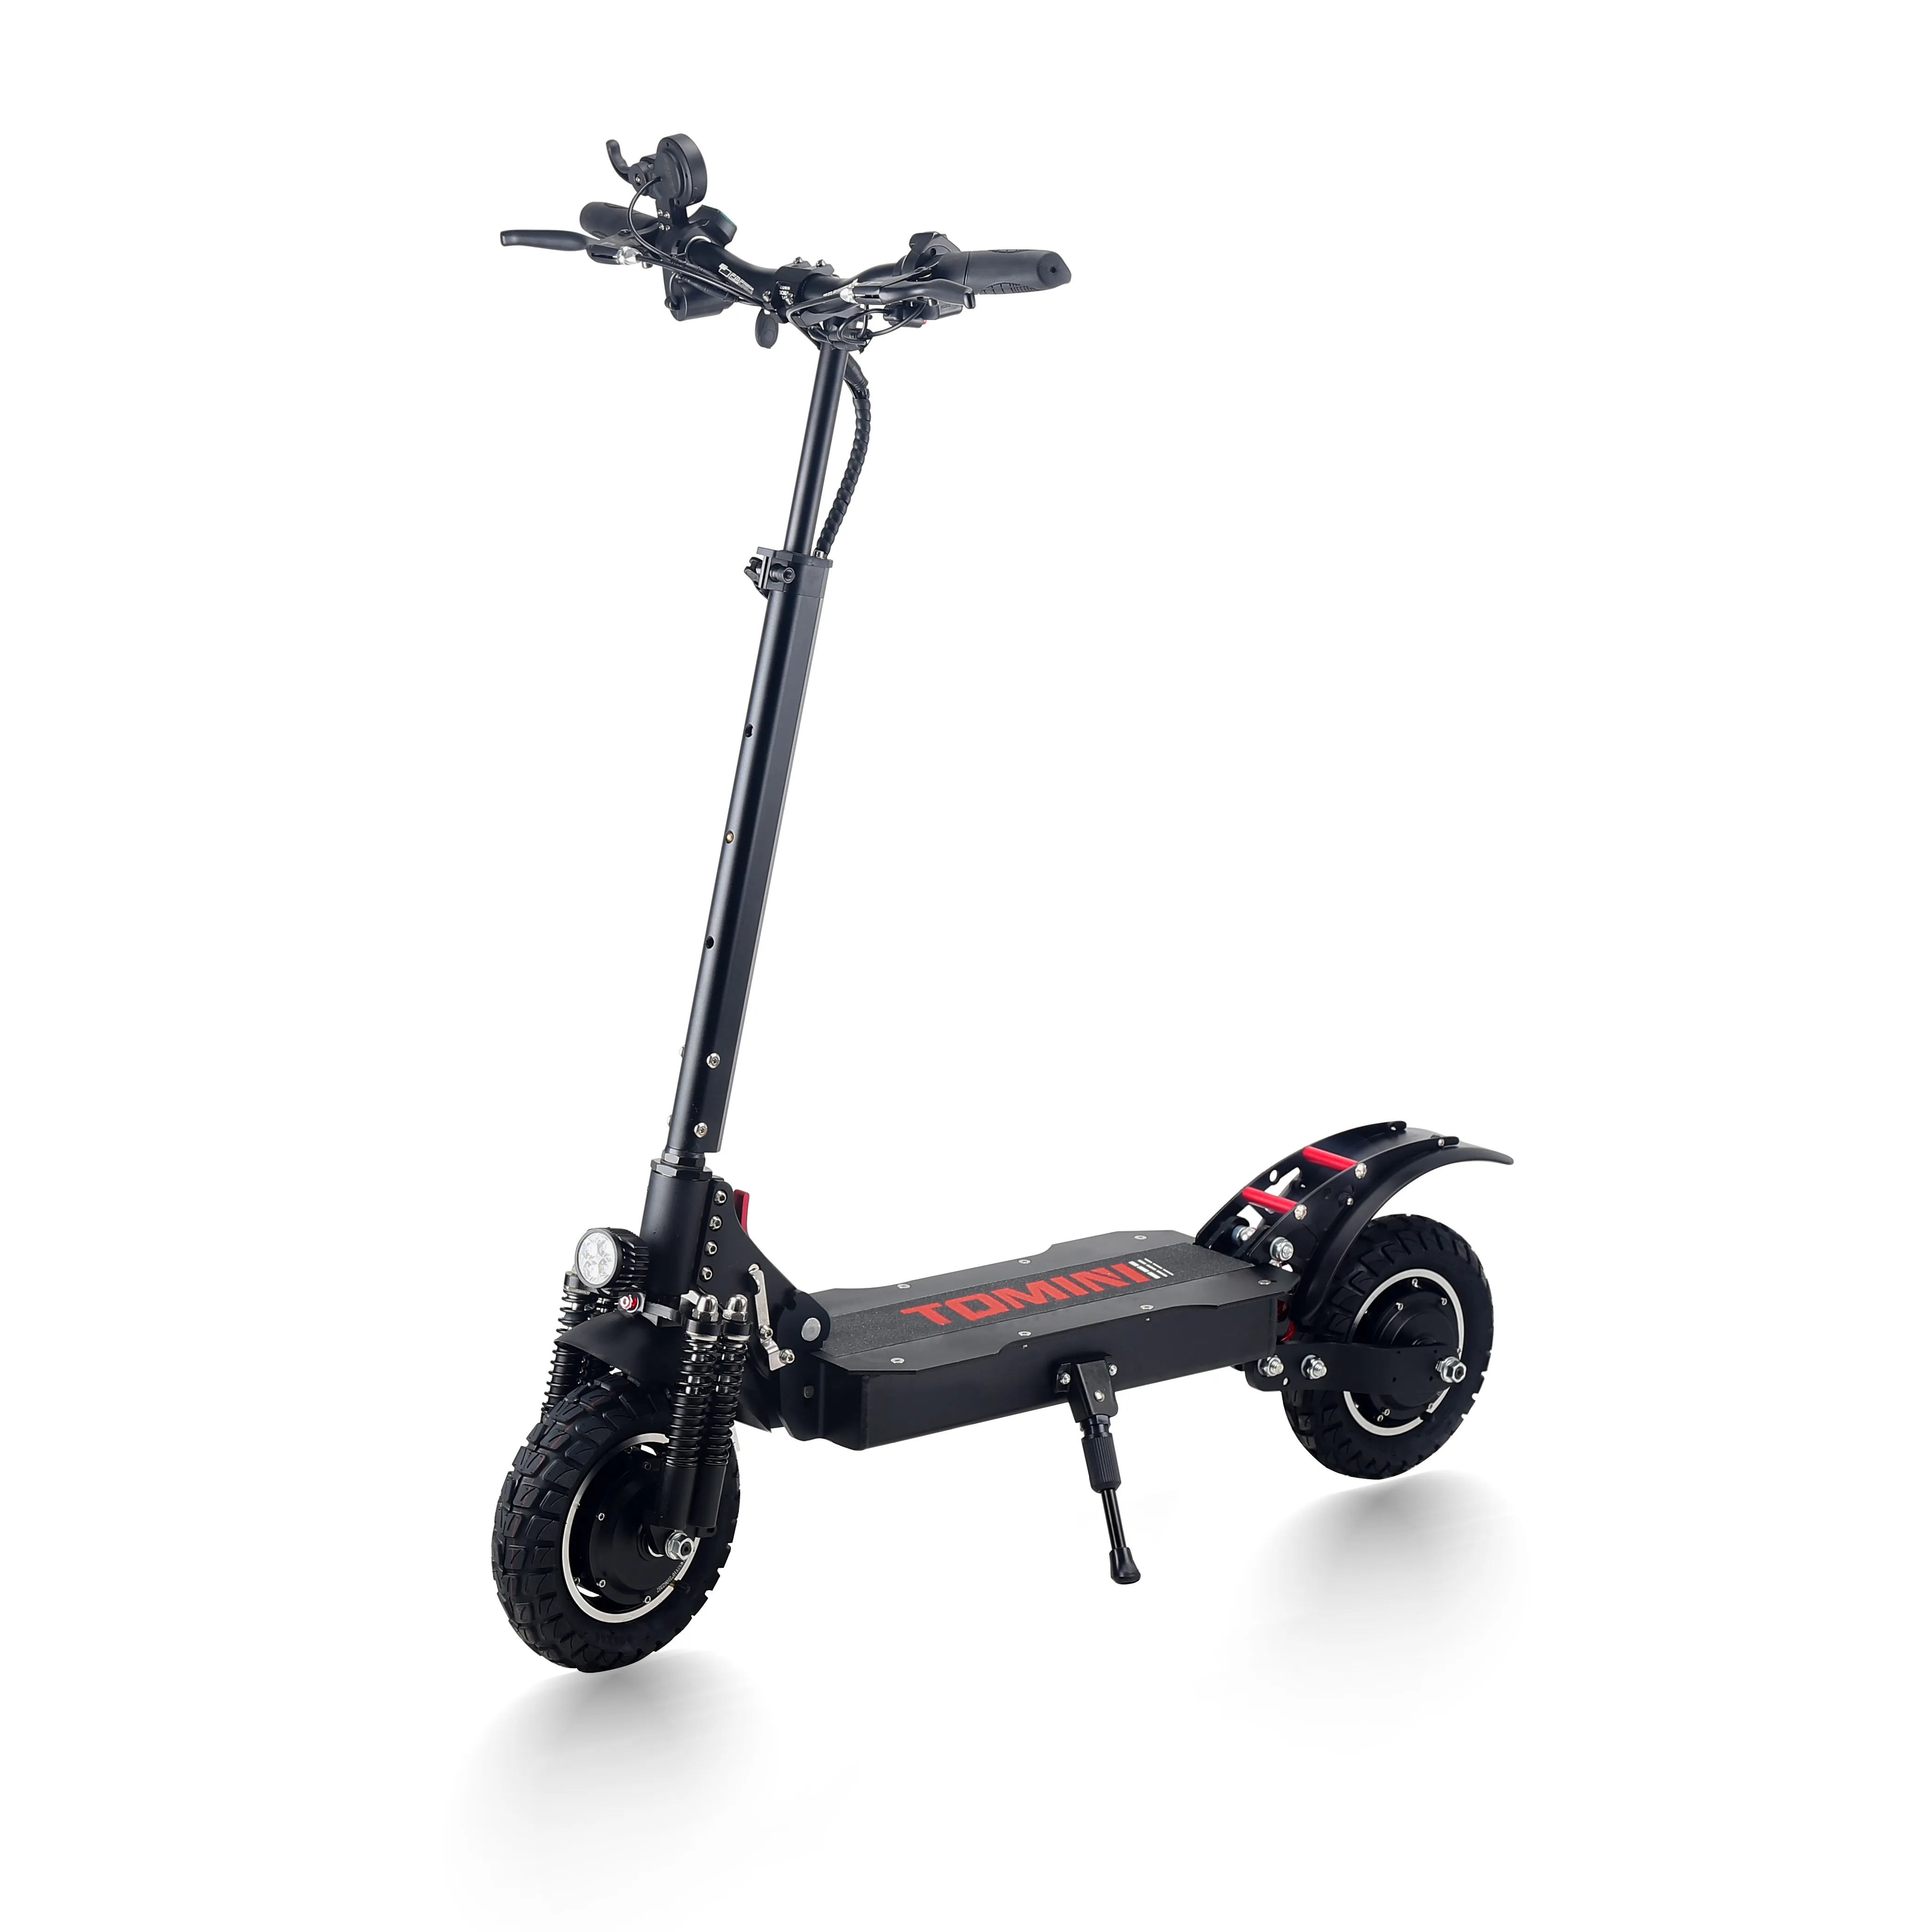 Tomini Eu warehouse e scooter off road electric scooter monopattino dual motor 2000W mobility electric scooters for adult